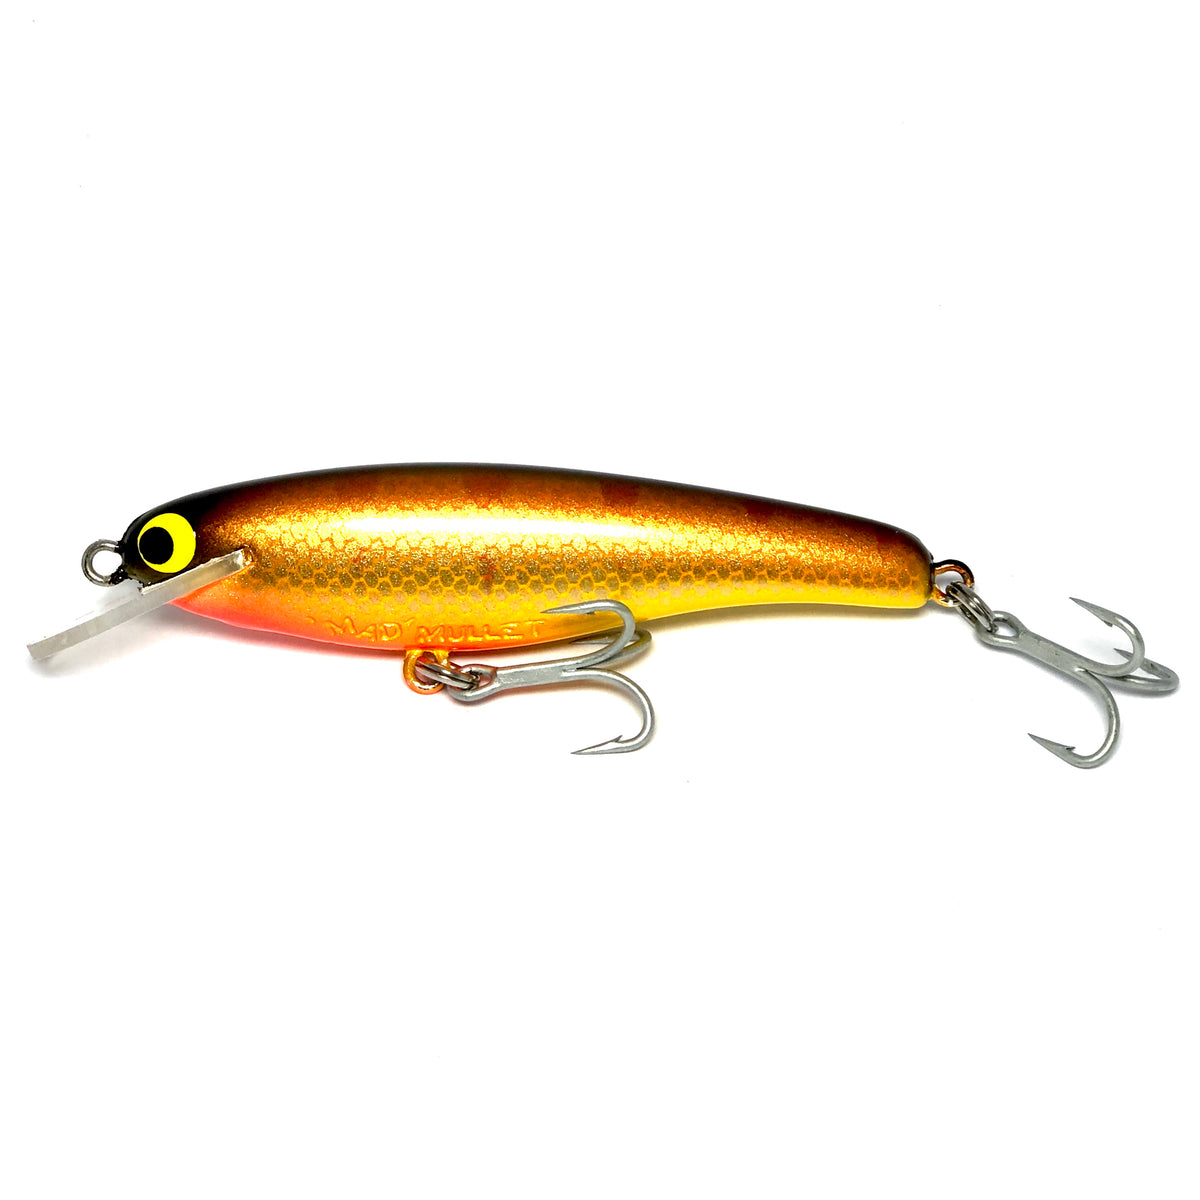 Mad Mullet 3 Shallow - Aussie Gold – Lively Lures Online Store